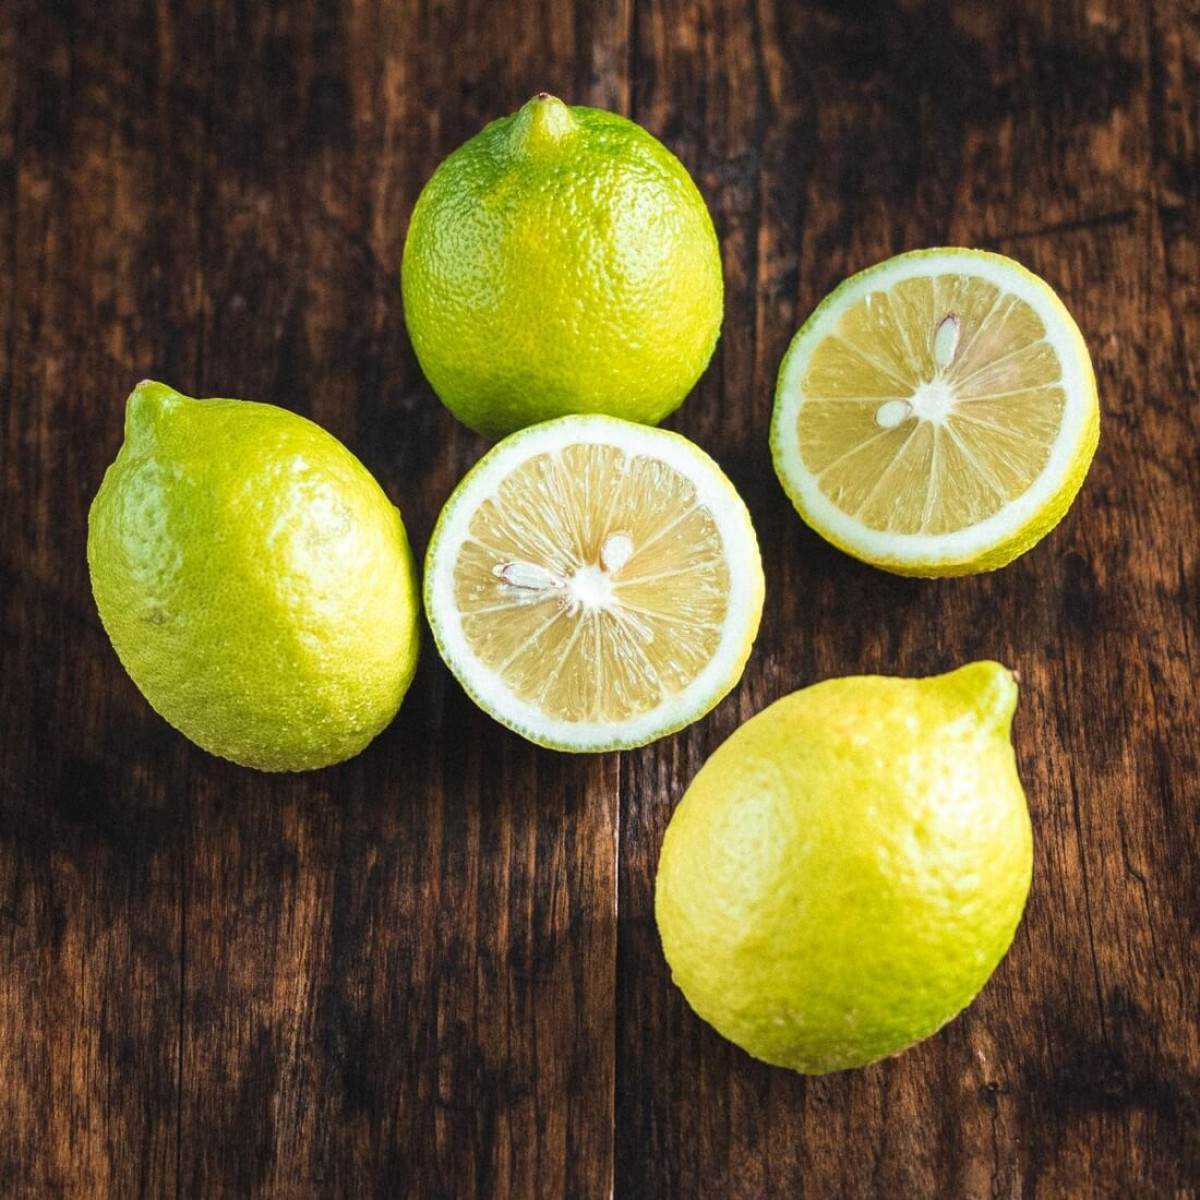 Product picture for Lemons